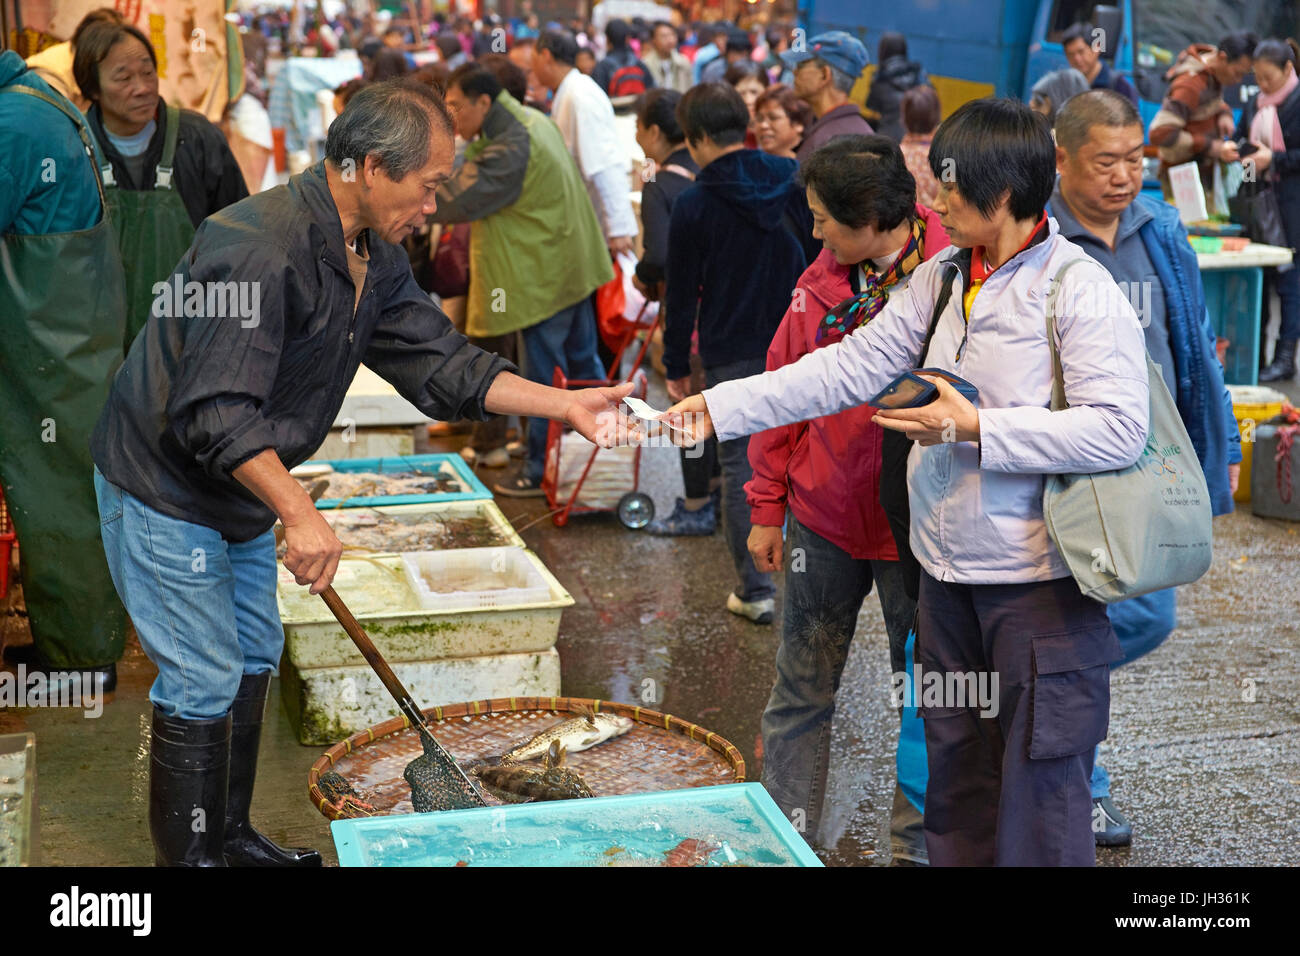 Live fish being bought and sold at the open air fish market in Kowloon, Hong Kong, China. Stock Photo